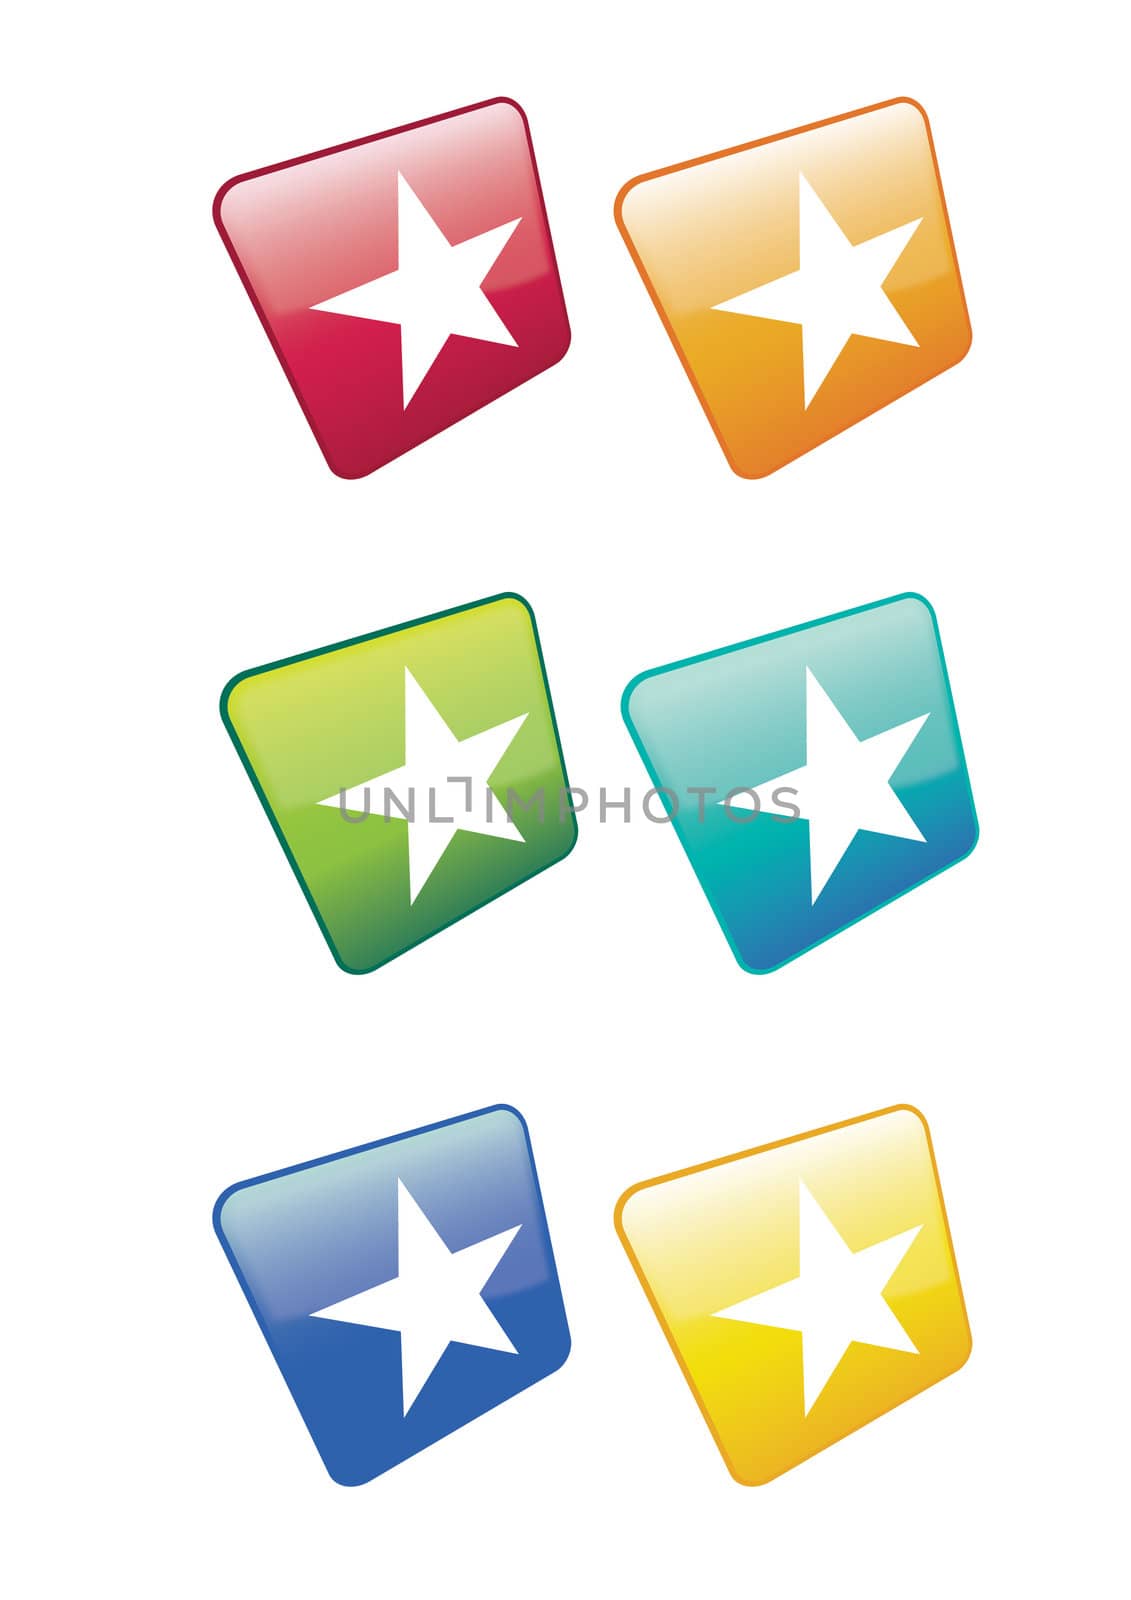 A set of six white star based web icons or buttons. Set on a rotated axis in various colour ways. For web or print use.